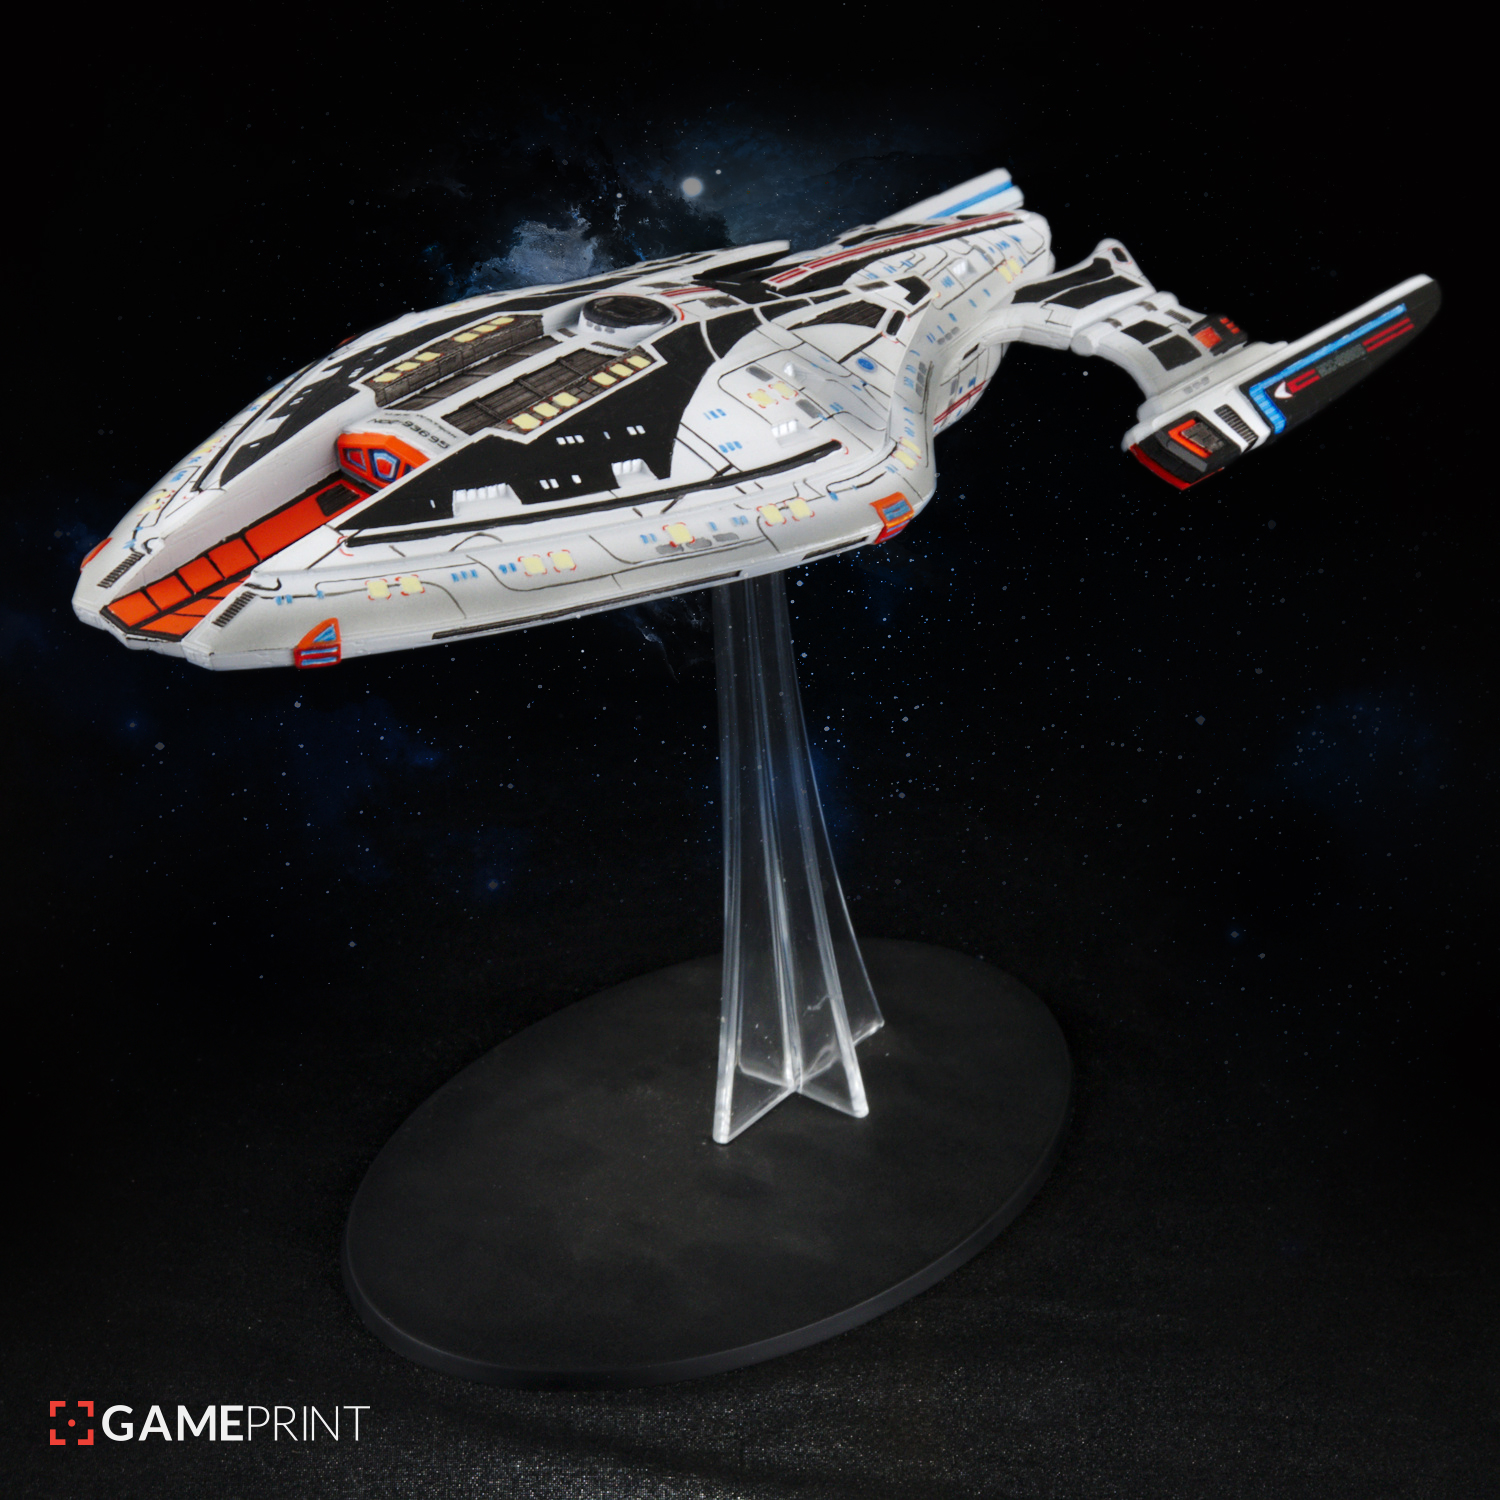 Star Trek Online Starships Get 3D Printed for Players Starting March